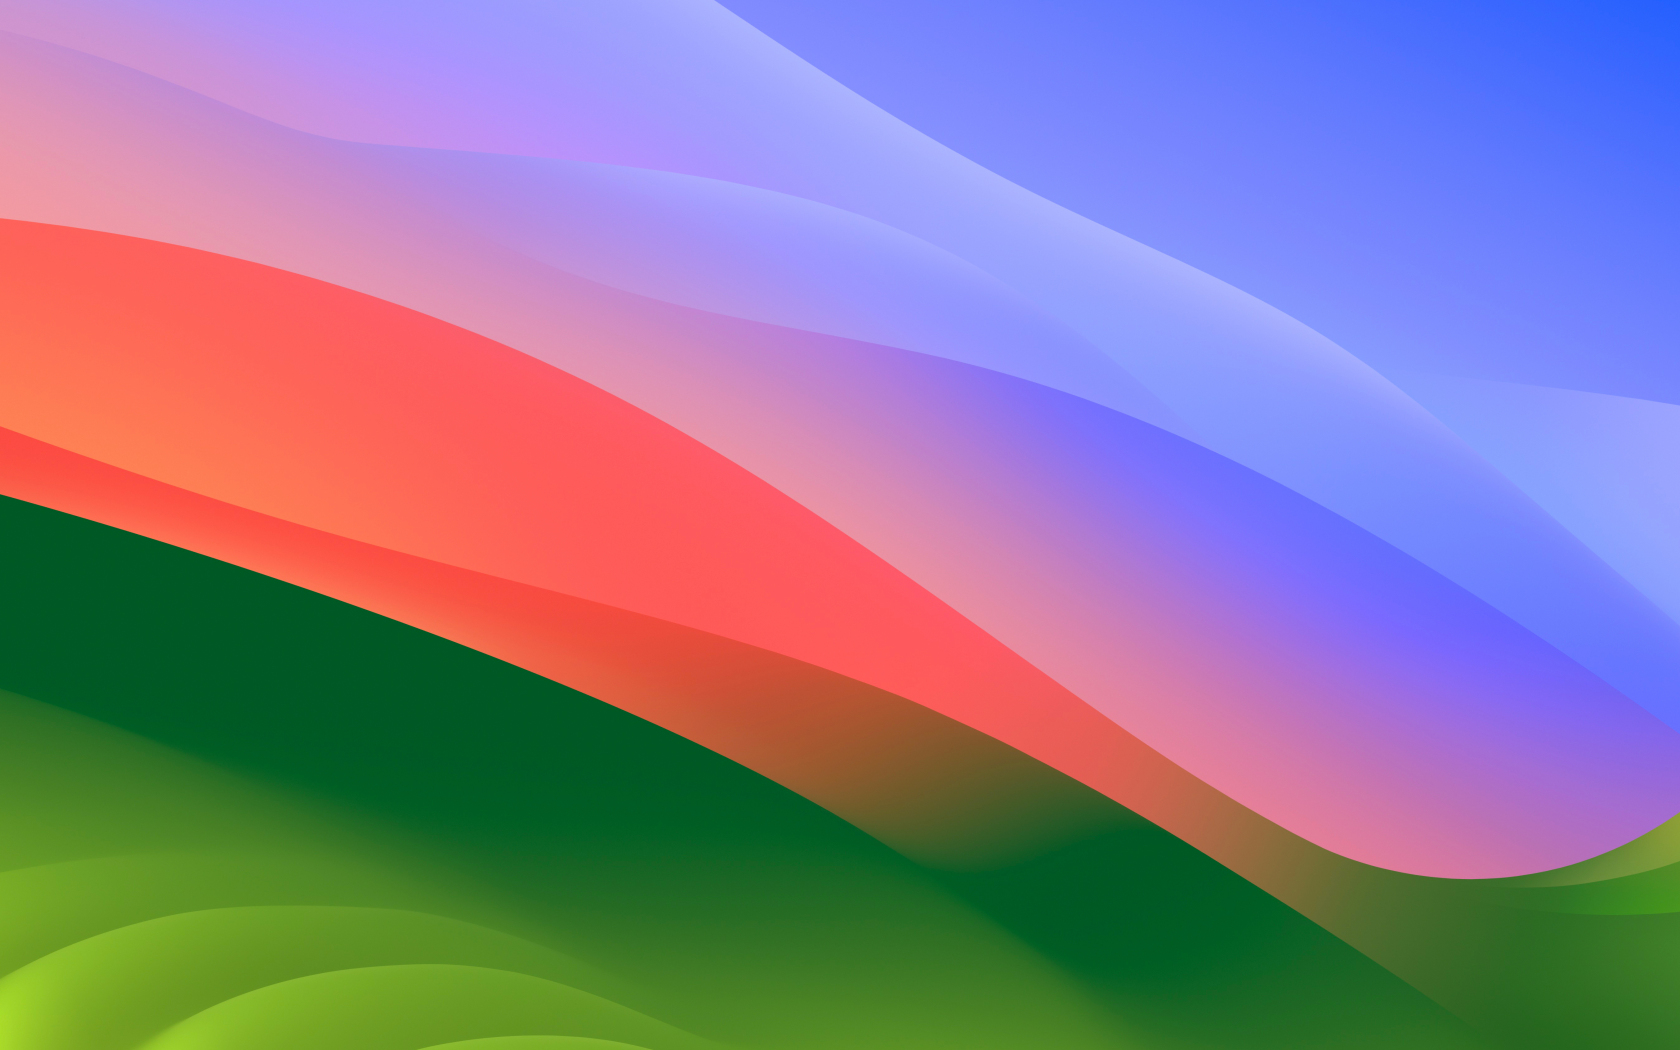 MacOS Sonoma, colorful waves, stock photo, 1680x1050 wallpaper